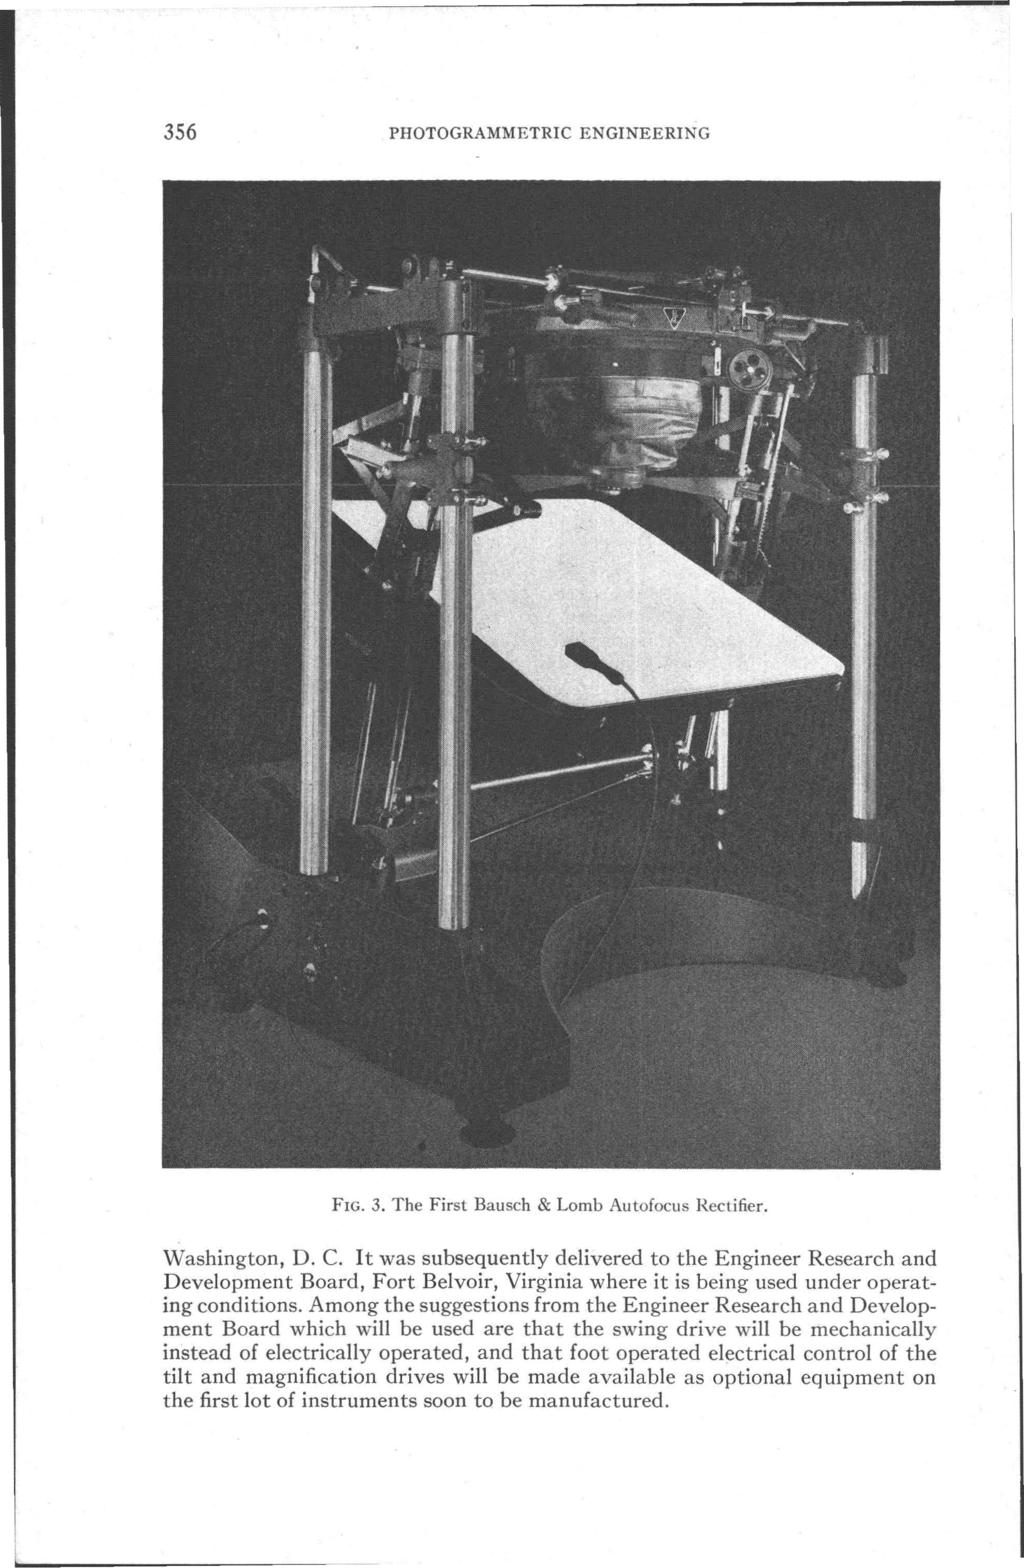 356 PHOTOGRAMMETRIC ENGINEERING FIG. 3. The First Bausch & Lomb AutoioclIs Rectifier. Washington, D. C.